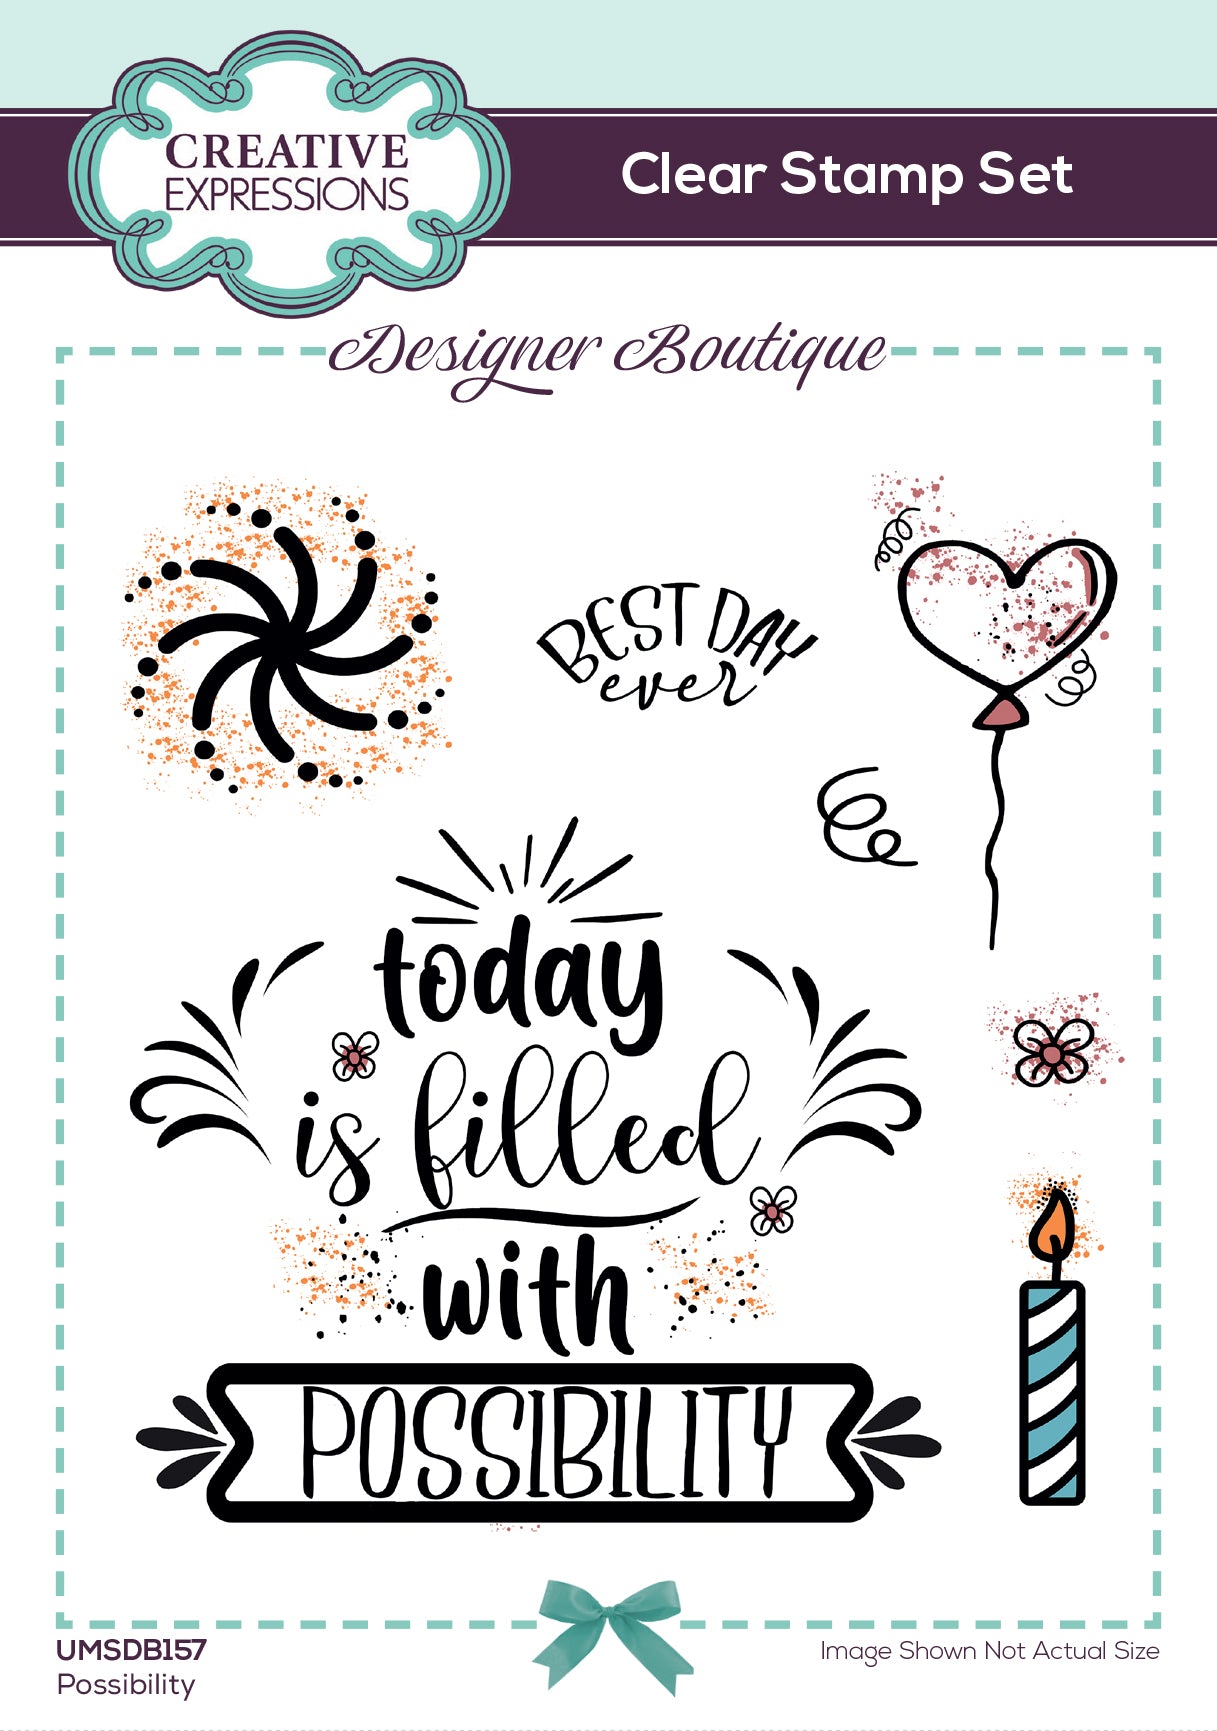 Creative Expressions Designer Boutique Possibility 6 in x 4 in Stamp Set